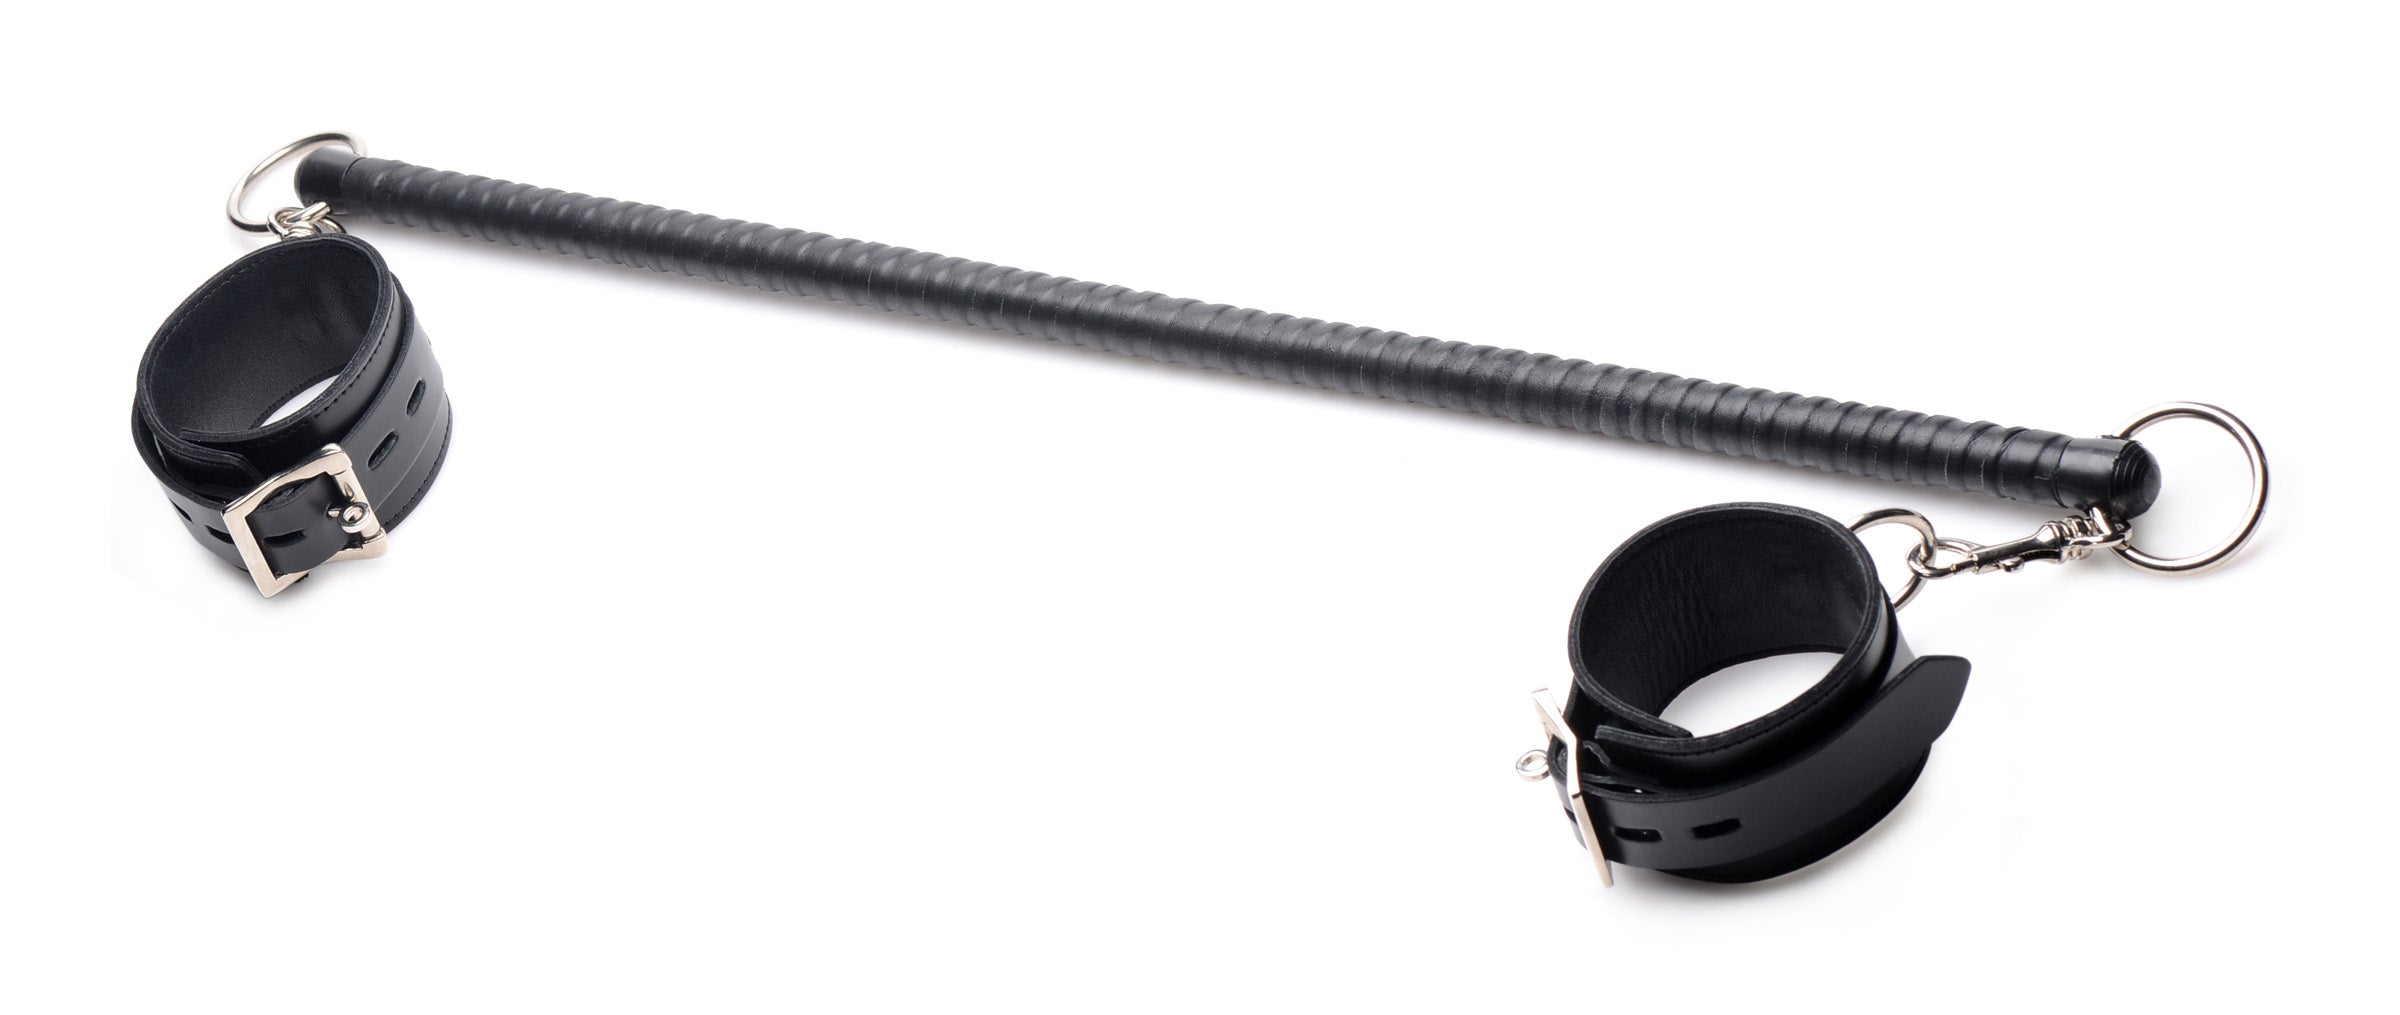 Leather Wrapped Spreader Bar with Cuffs